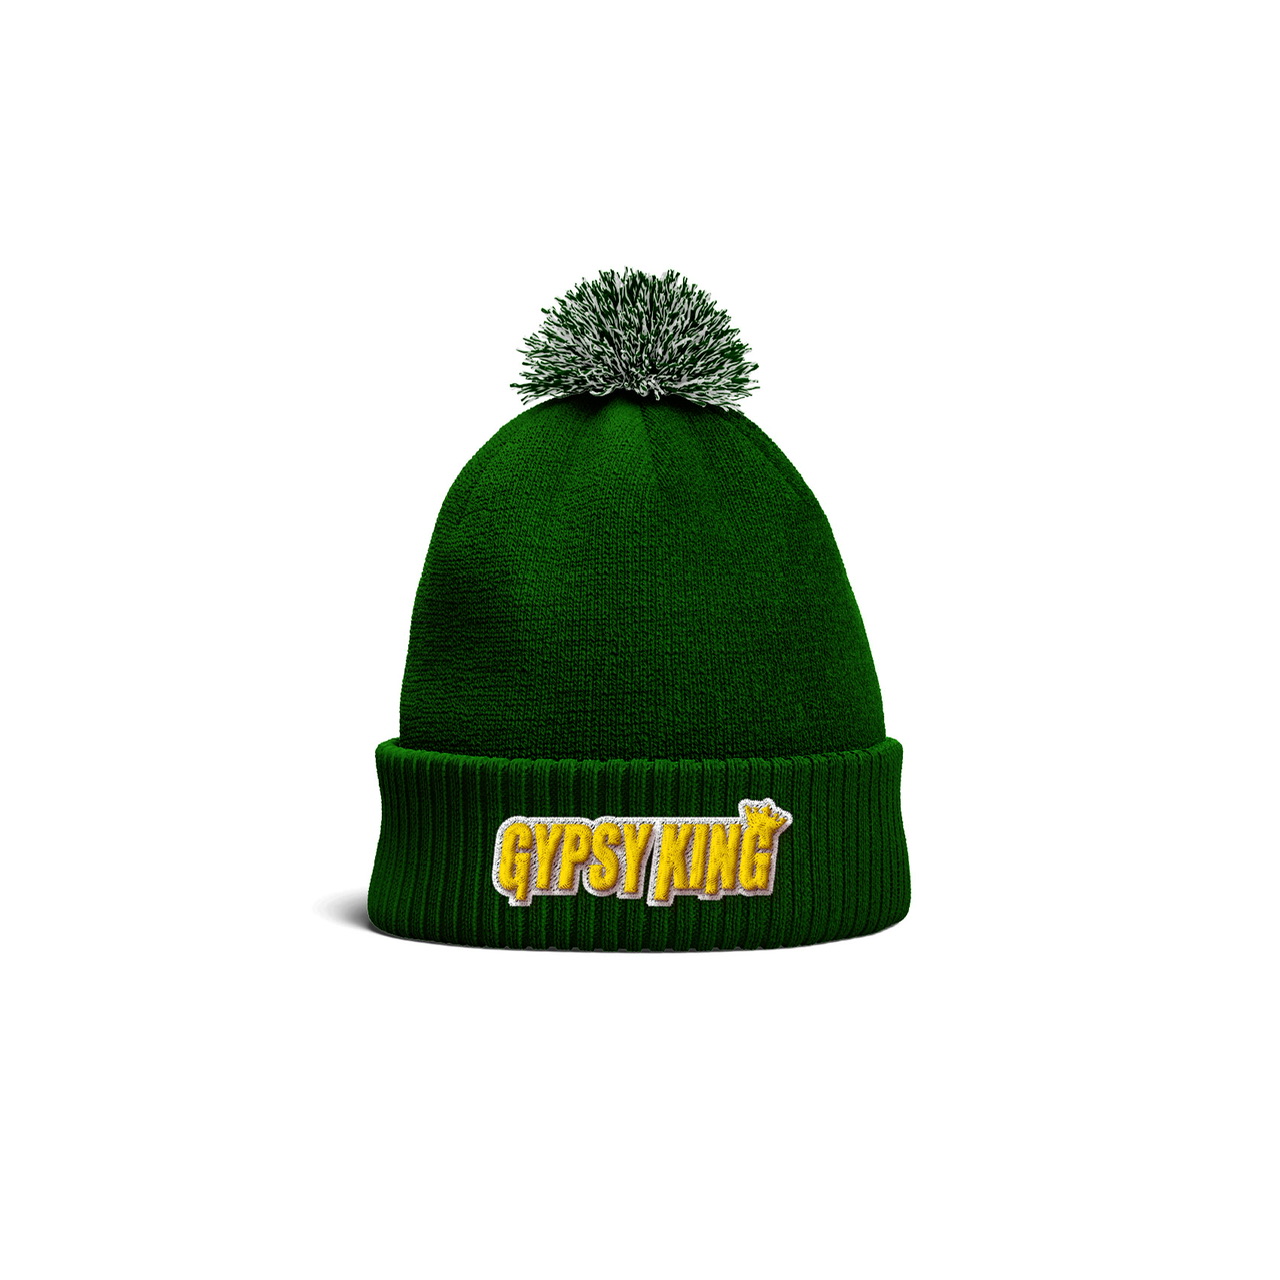 Green and Gold Gypsy King Pom Pom Hat - Tyson Fury Official Merchandise